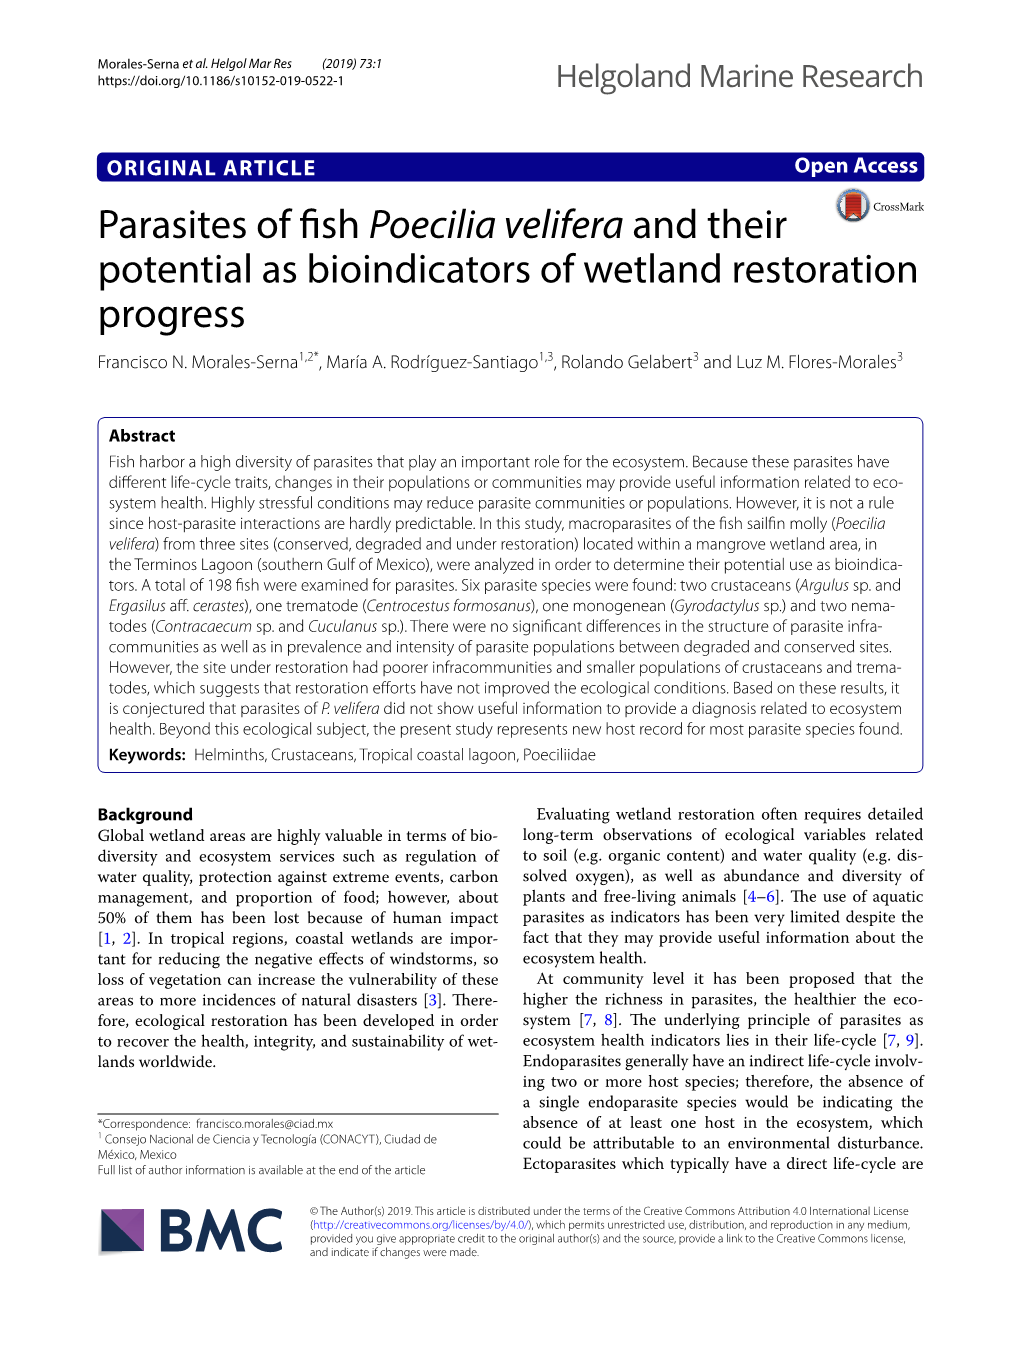 Parasites of Fish Poecilia Velifera and Their Potential As Bioindicators Of